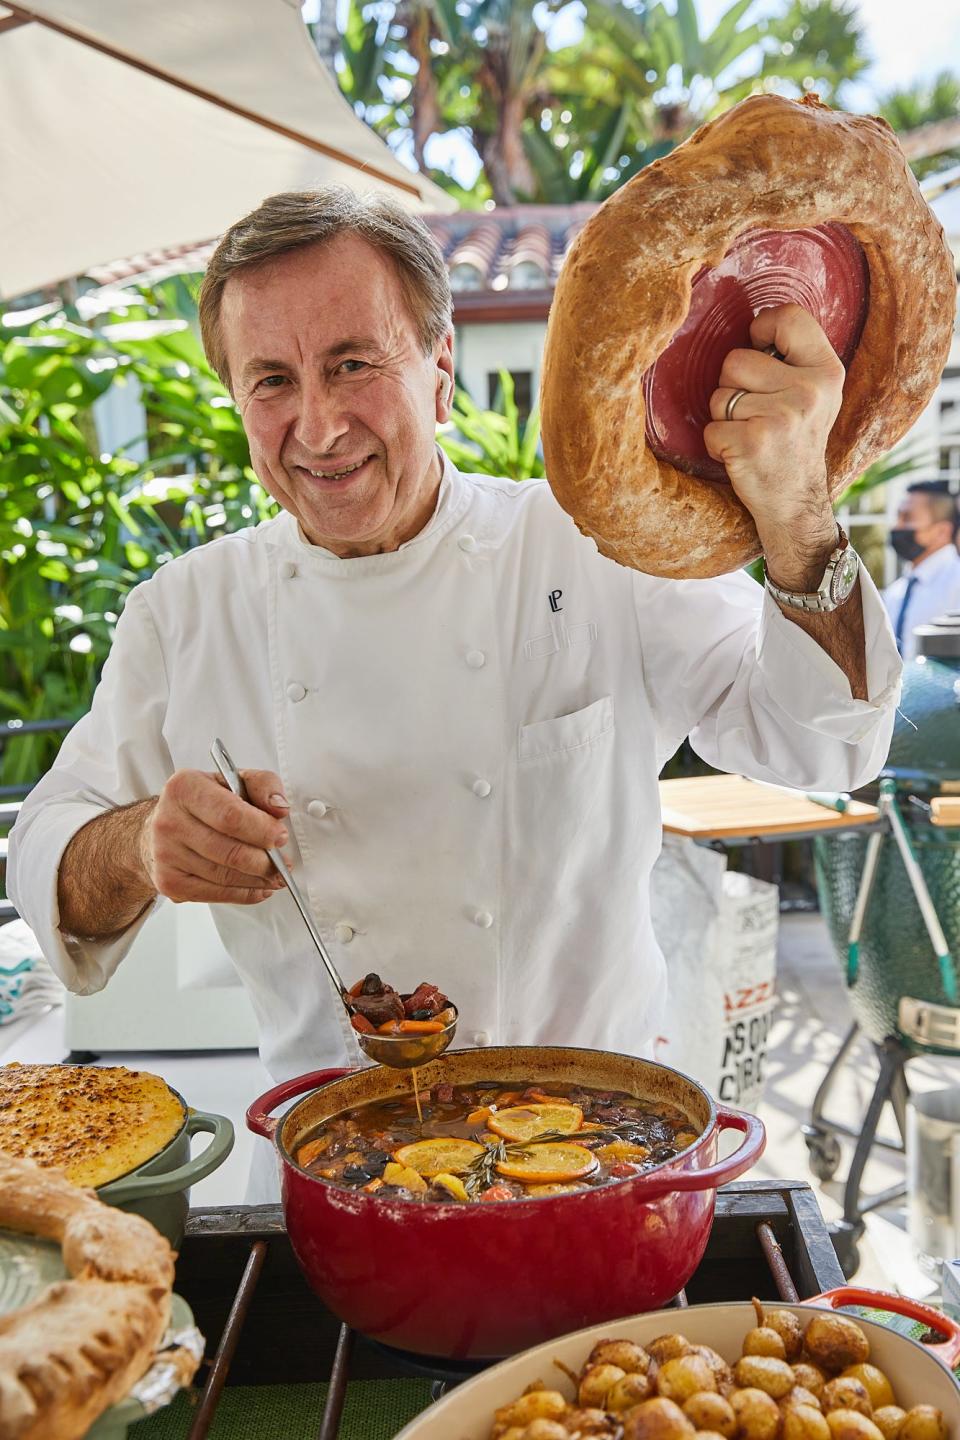 Daniel Boulud serves a country French stew during the 2021 Palm Beach Food and Wine Festival.